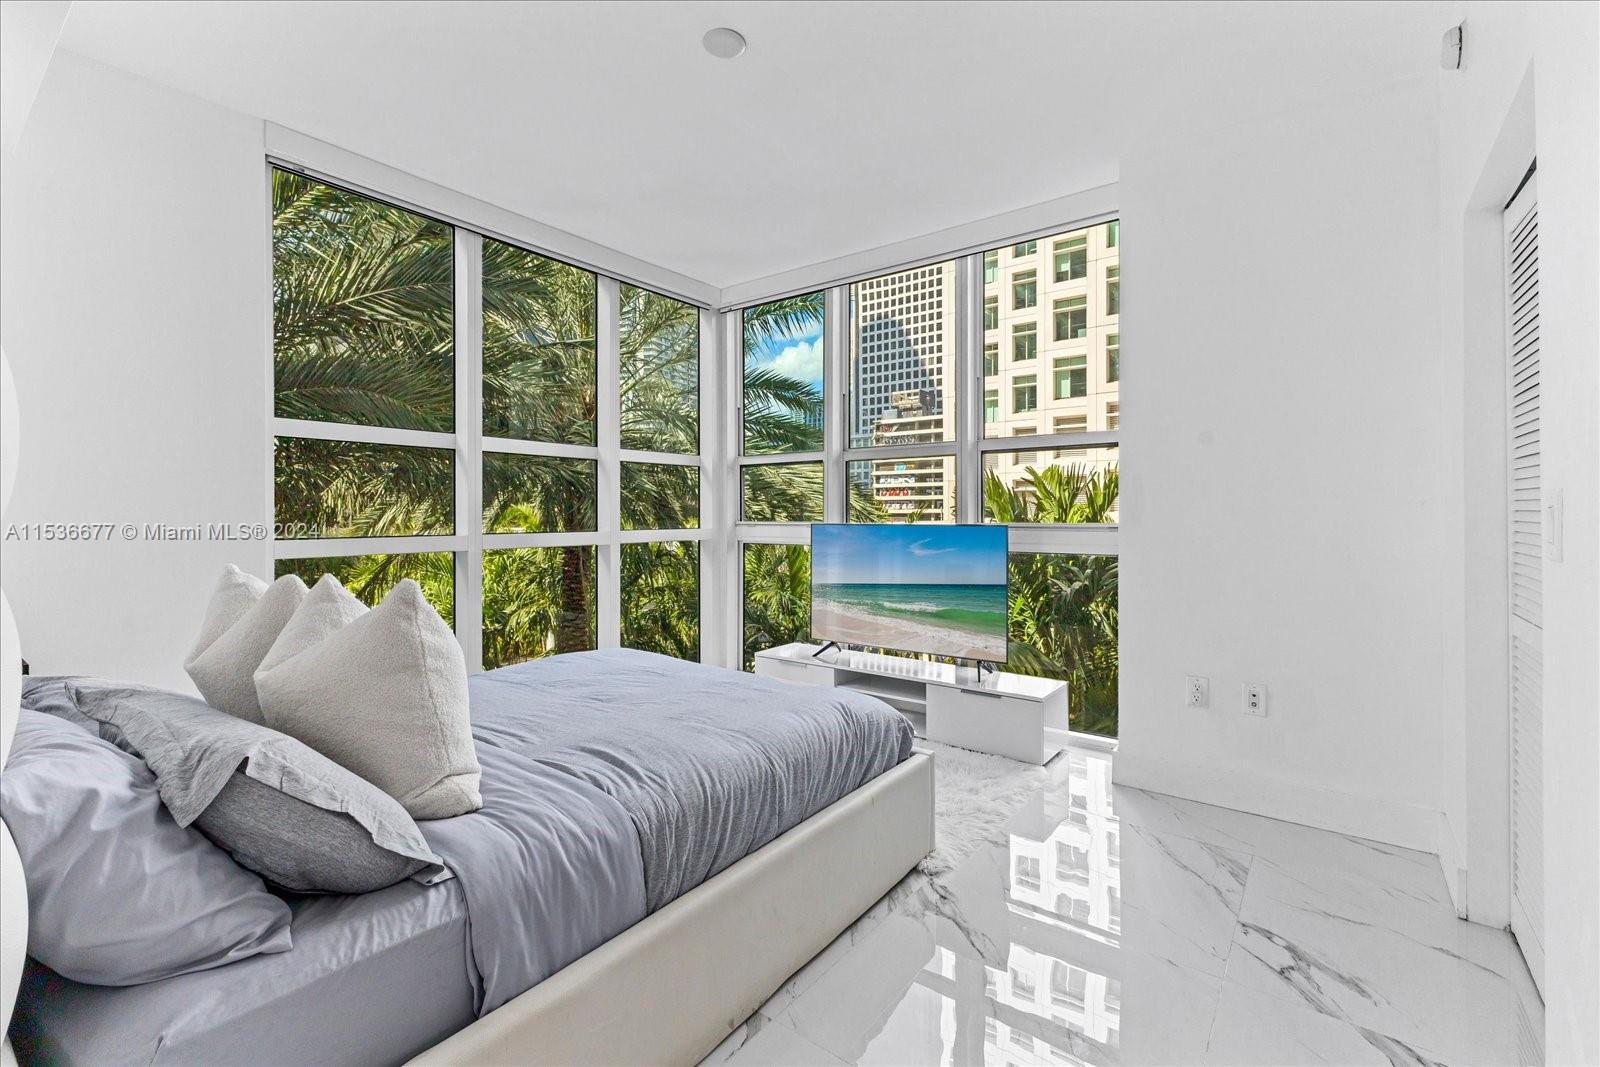 Beautiful MOVE IN READY corner unit completely renovated and designed in the heart of Brickell. Brand new kitchen & bathroom, porcelain tile flooring throughout entire unit, stainless steel appliances, washer/dyer, black out curtains and spacious corner balcony over looking lush palm trees. Building offers state of the art amenities such as two amazing pools with cabanas, exercise room, steam room and business center. Conveniently located within walking distance of banks, shops at Brickell City Center, parks, restaurants, downtown and much more. 30 day minimum rentals ok, same floor parking, LOW HOA.